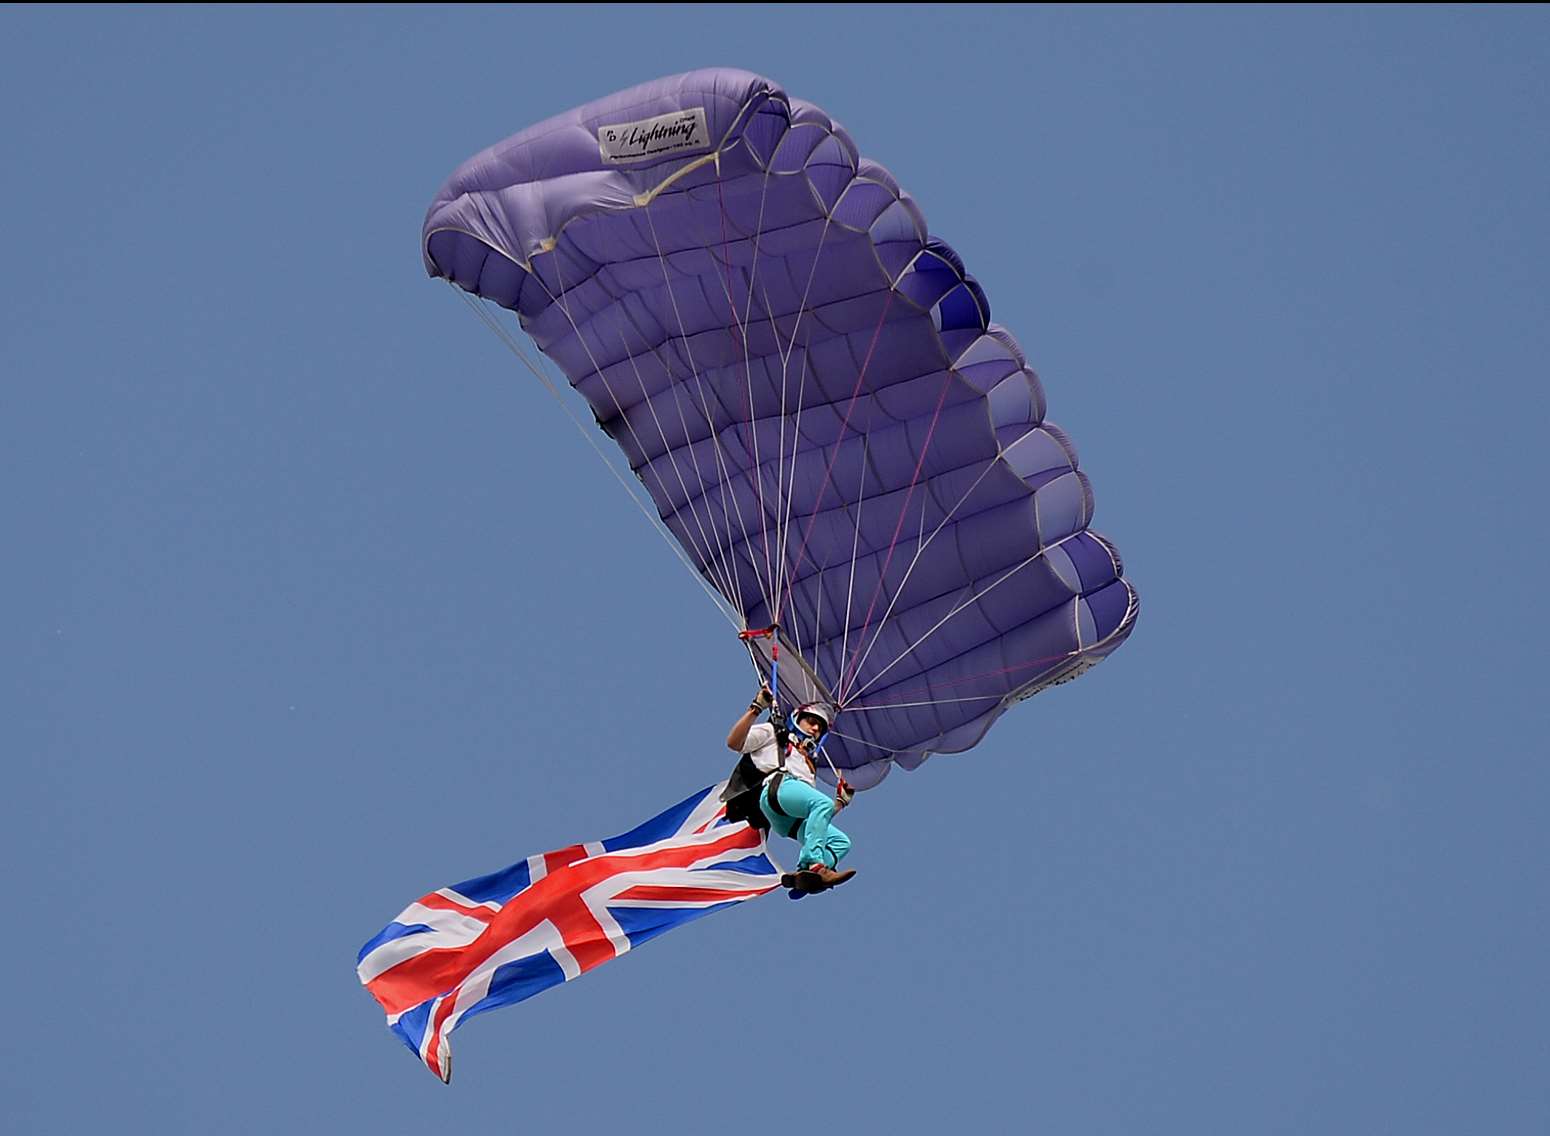 Headcorn parachute display team will be dropping in on Sheppey on Saturday